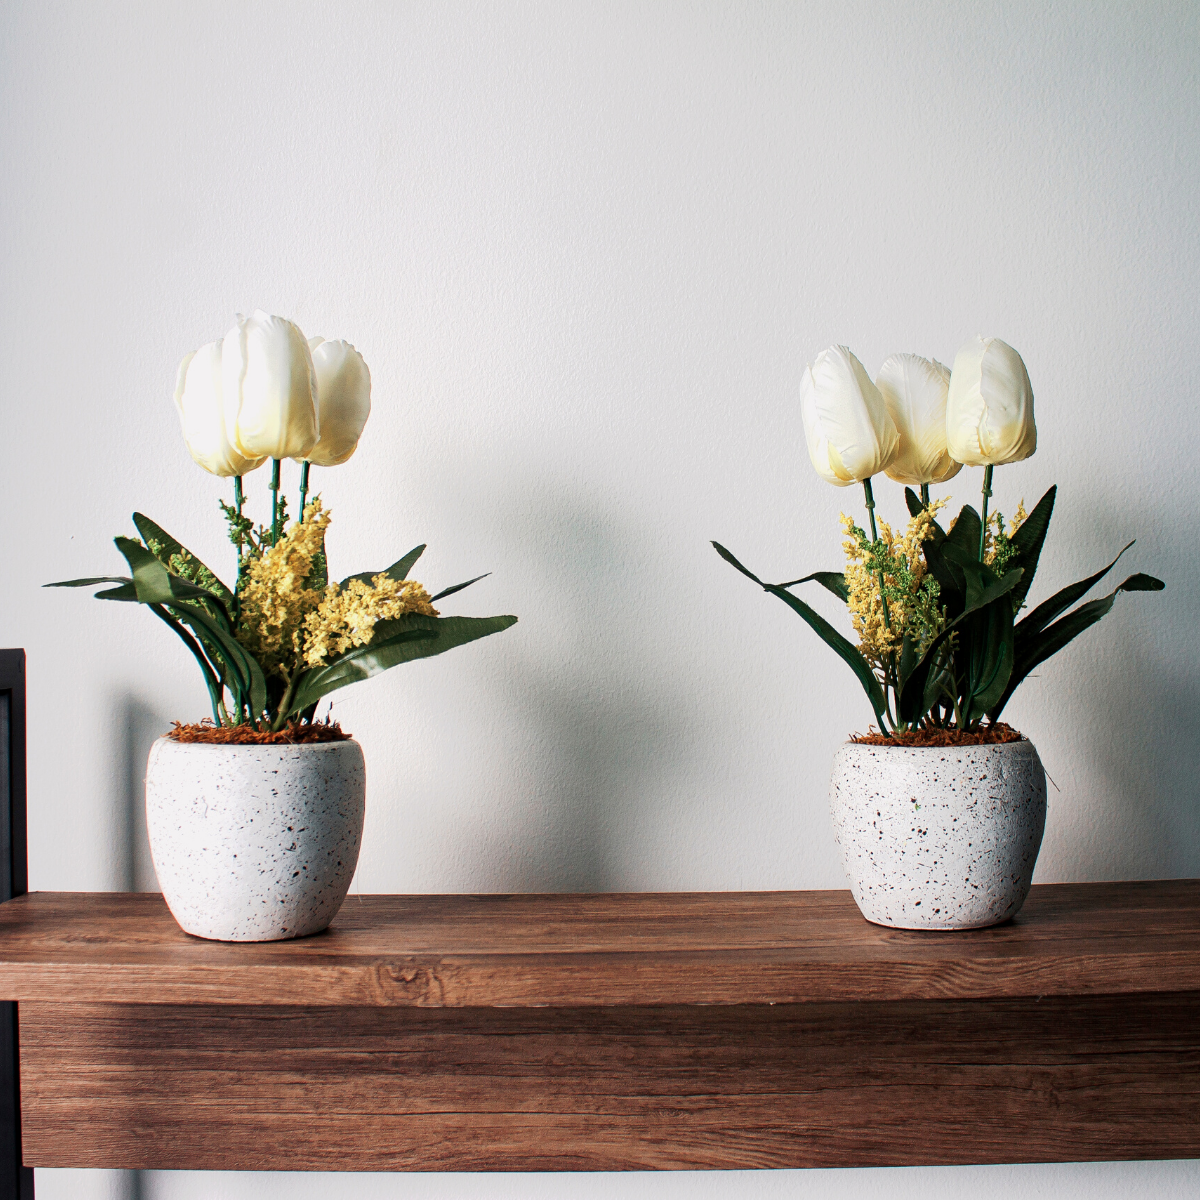 Two white plant pots on a wooden table. Each pot has white tulips blooming in it with long green leaves.